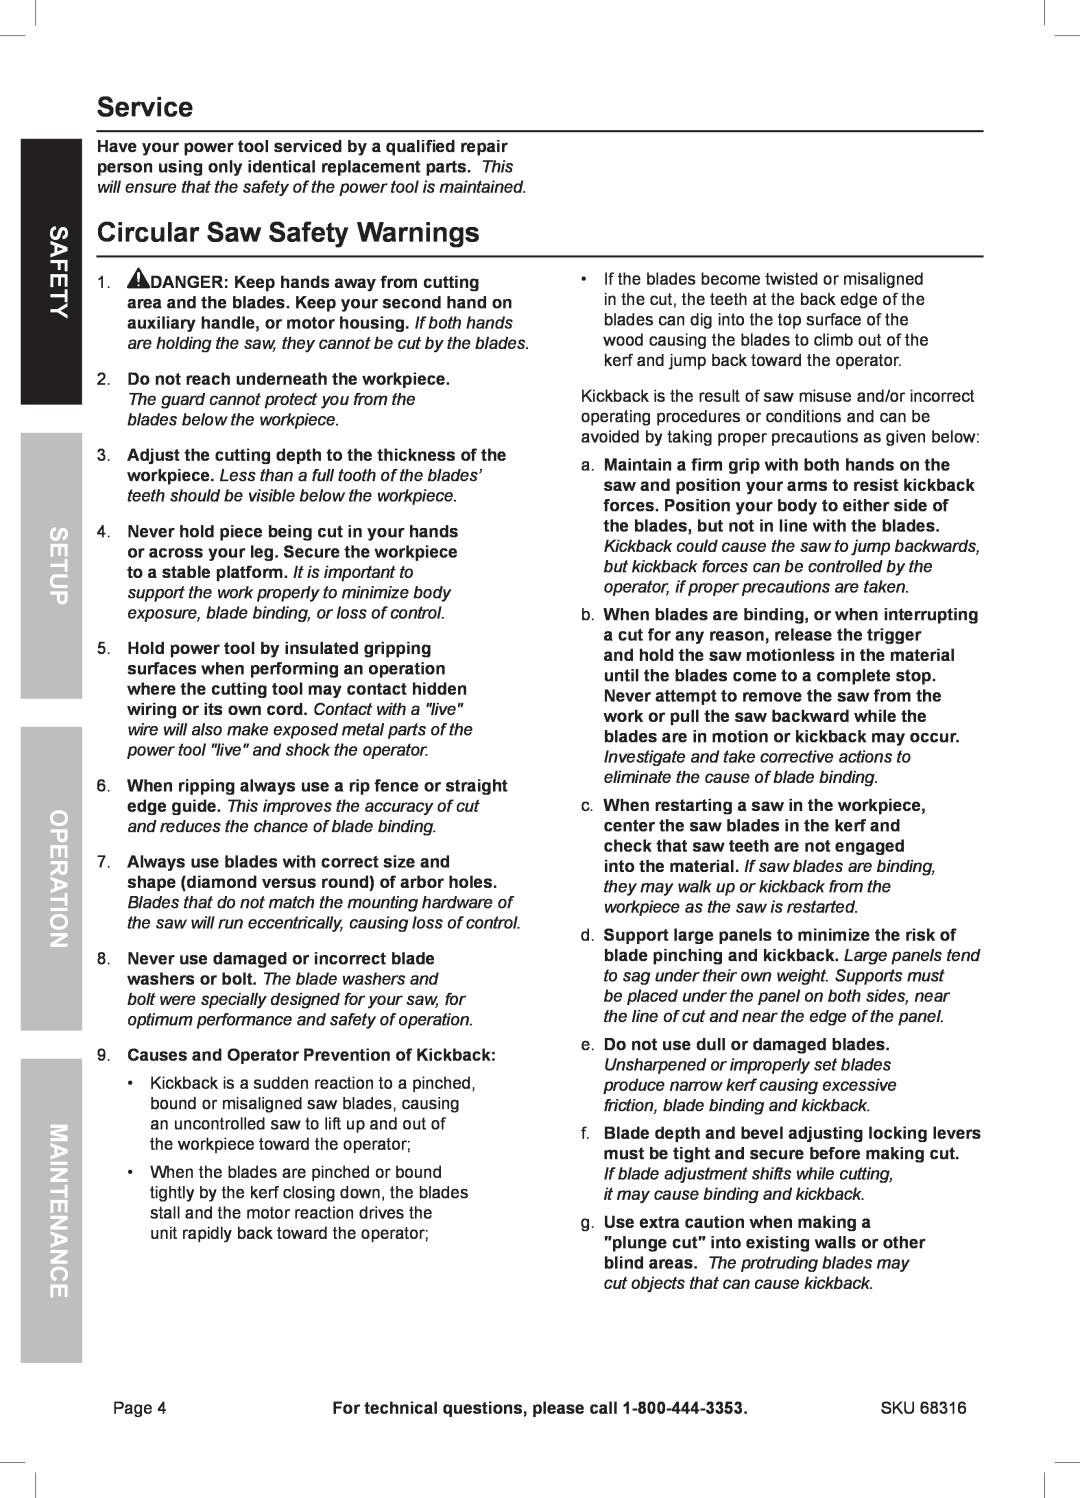 Chicago Electric 68316 owner manual Service, Circular Saw Safety Warnings, Safety Setup Operation Maintenance 